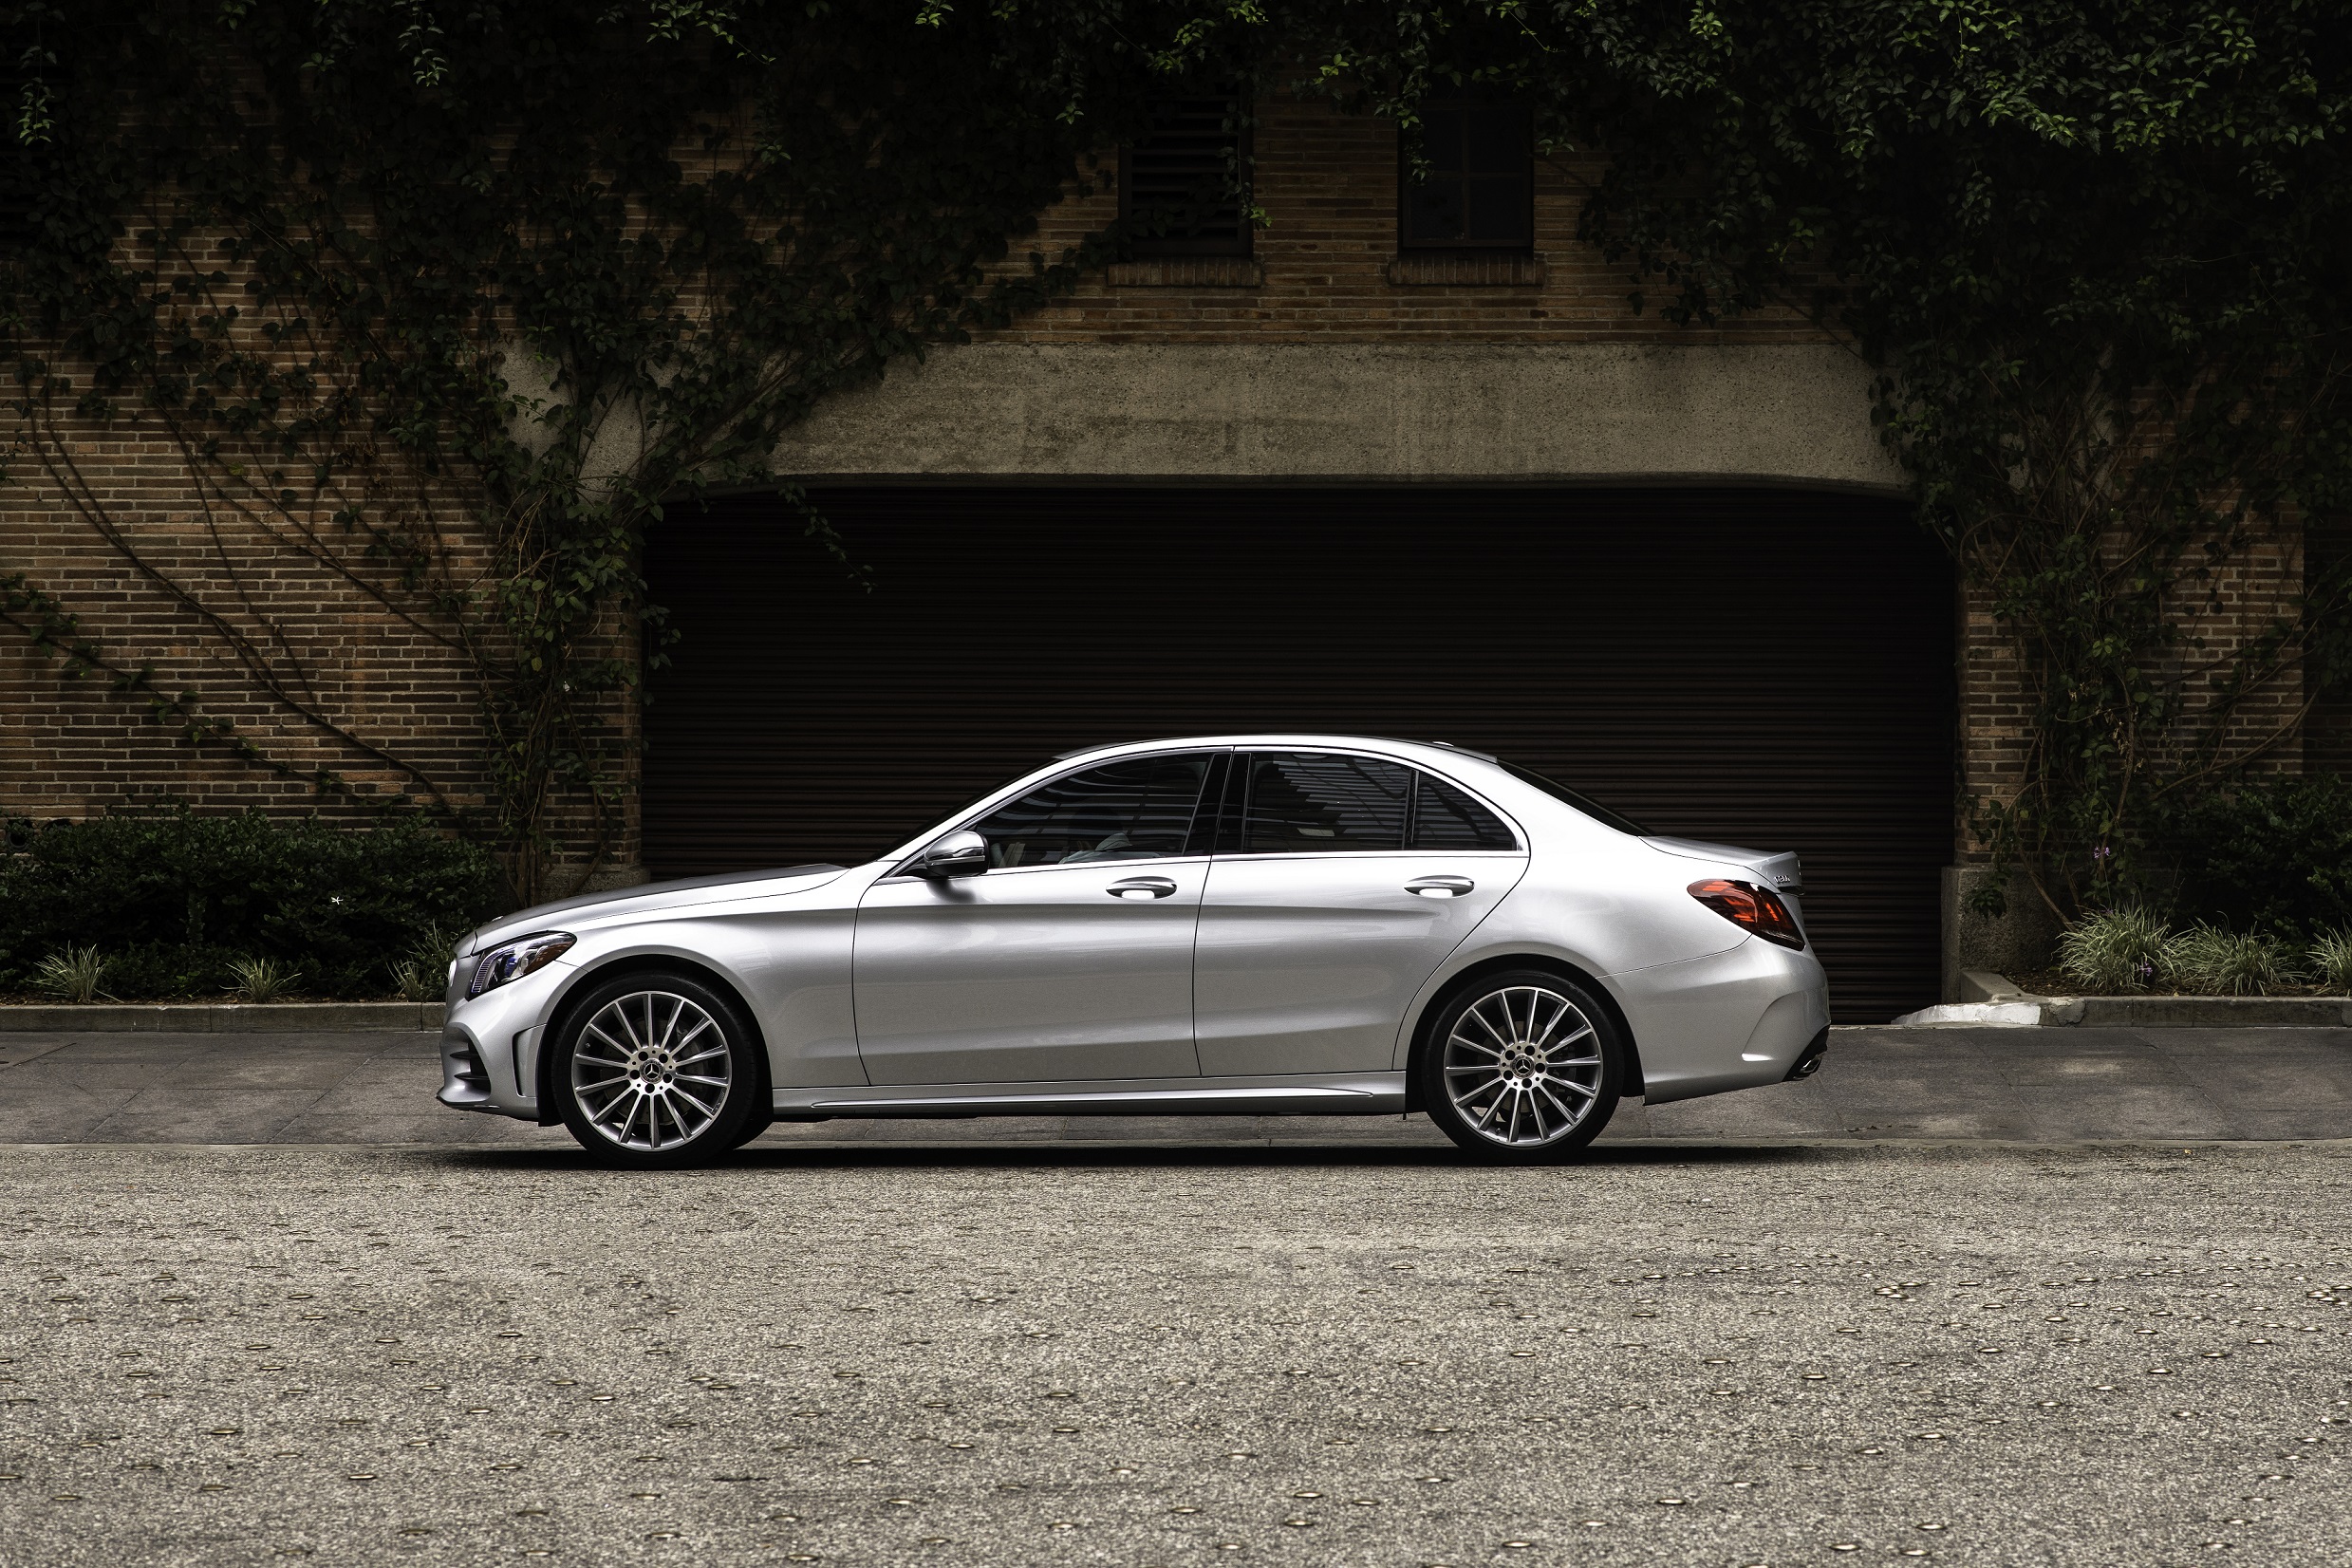 Mercedes-Benz Repair and Maintenance in Lake Forest, CA